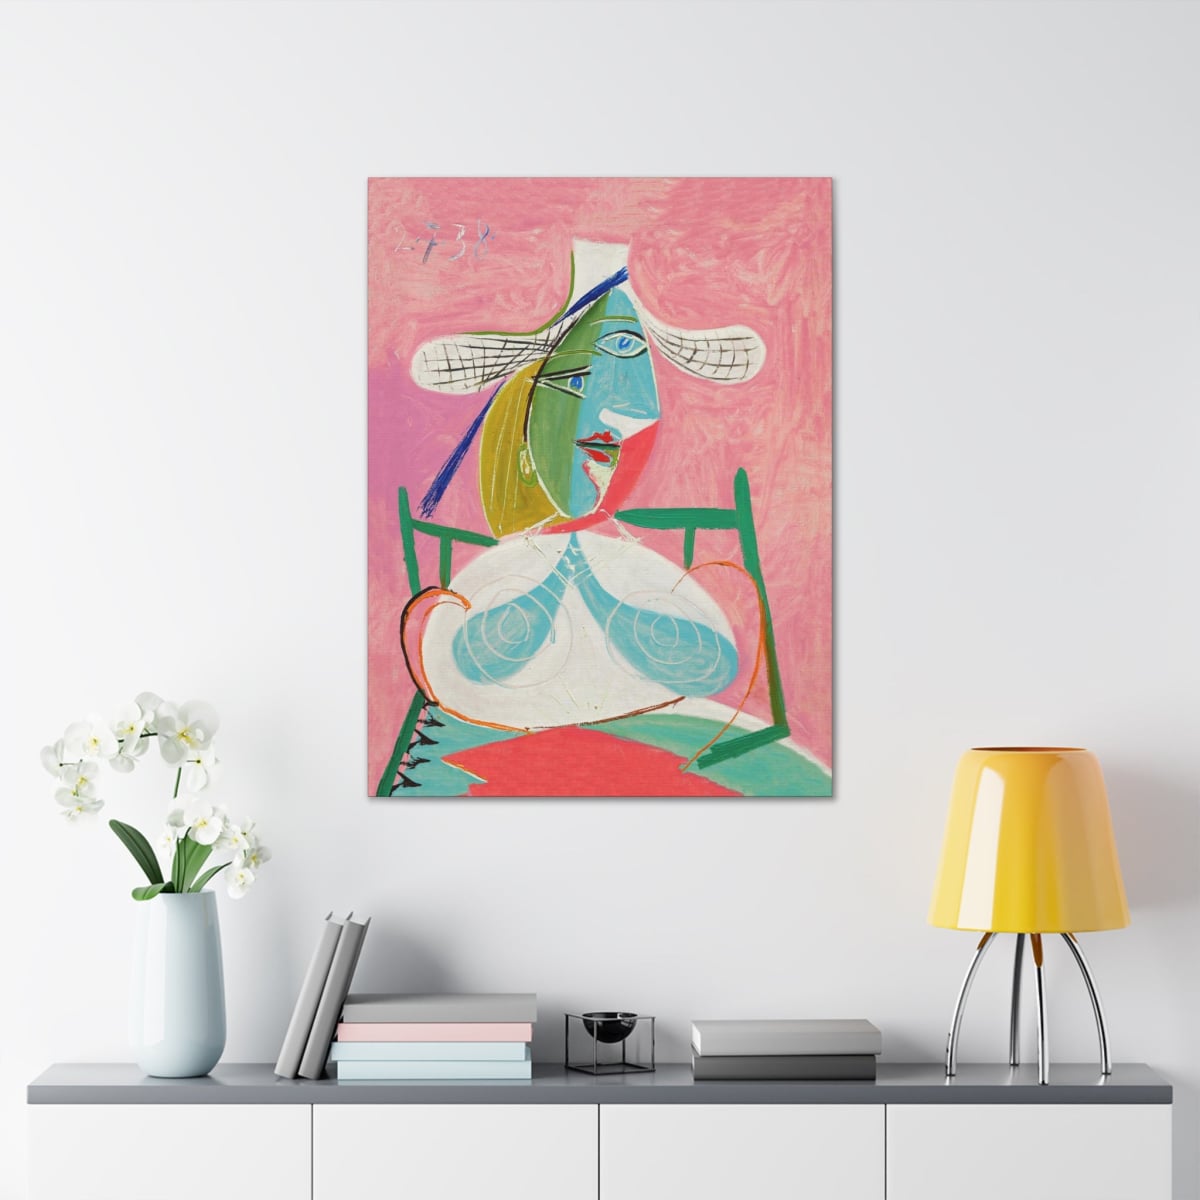 Pablo Picasso’s Seated Woman with a Straw Hat - Canvas Gallery Wrap